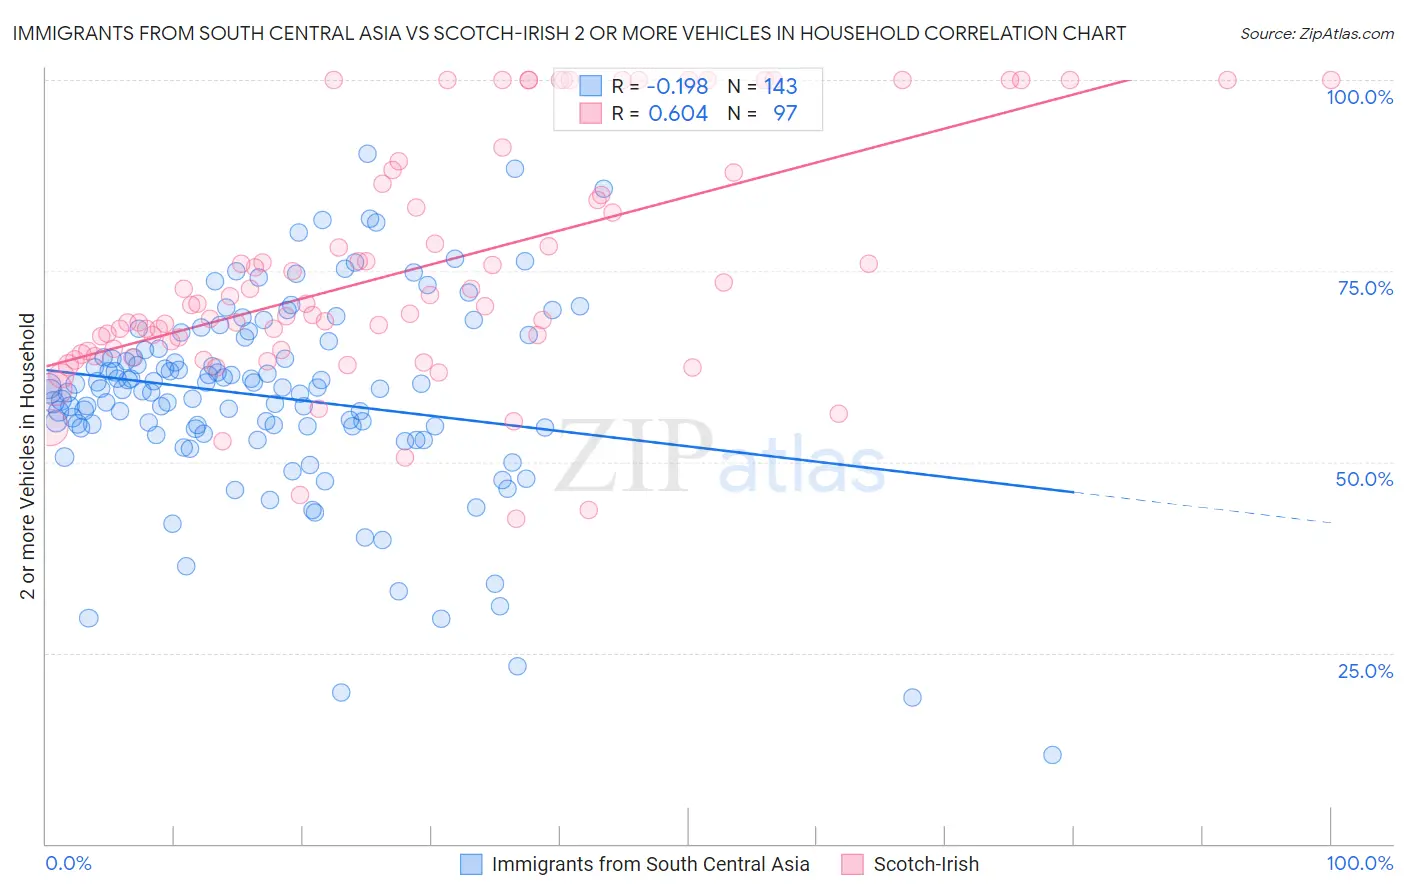 Immigrants from South Central Asia vs Scotch-Irish 2 or more Vehicles in Household